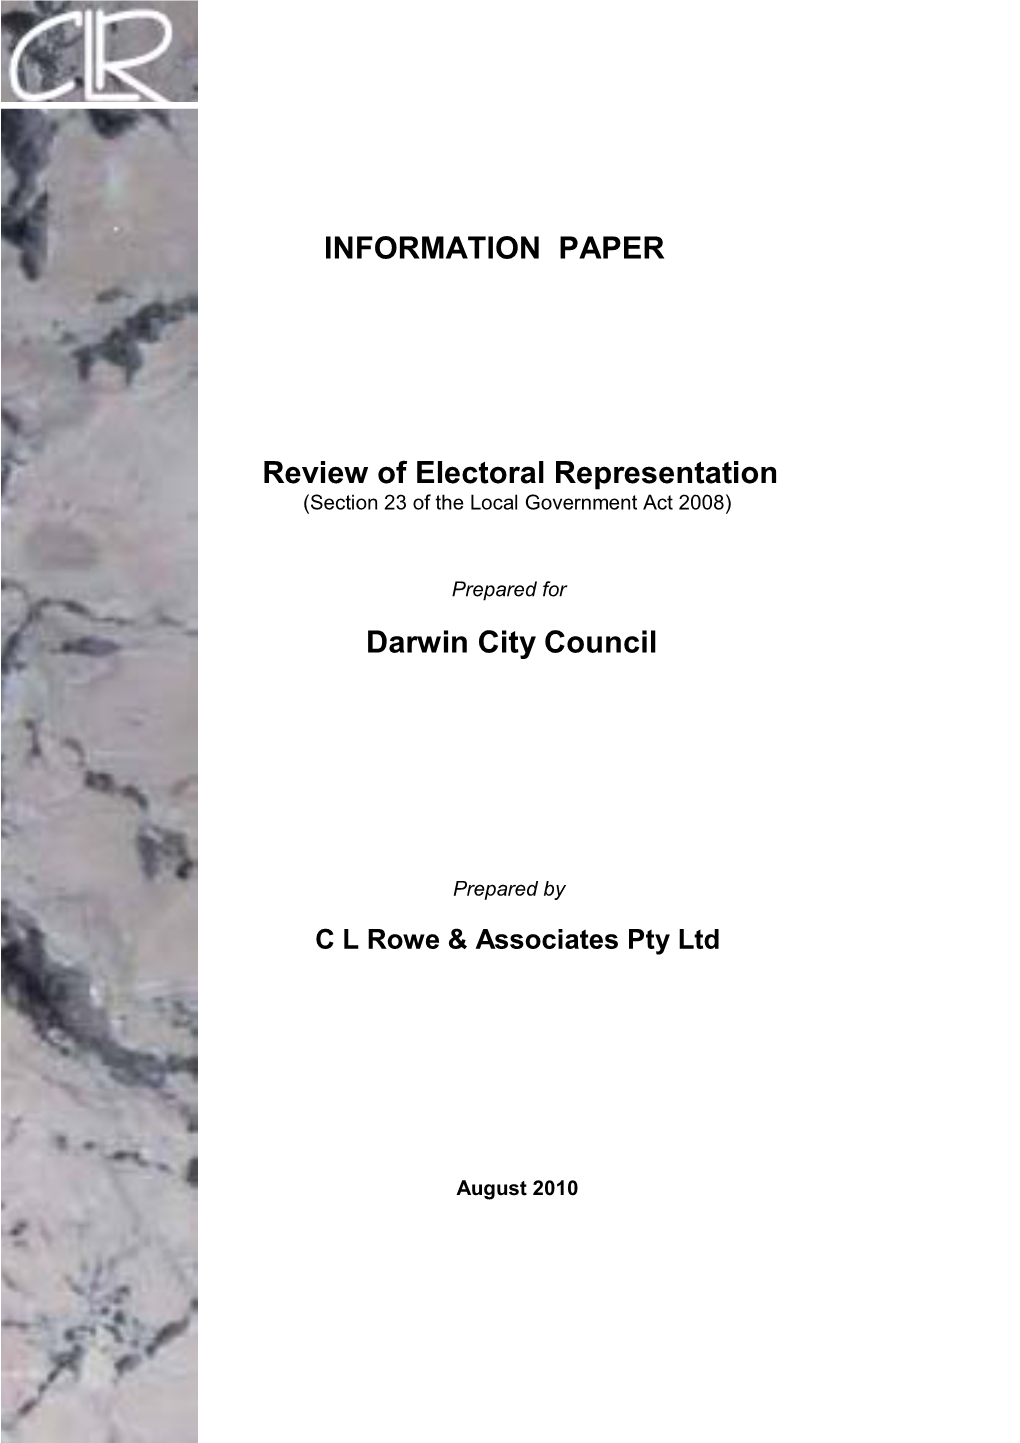 INFORMATION PAPER Review of Electoral Representation Darwin City Council